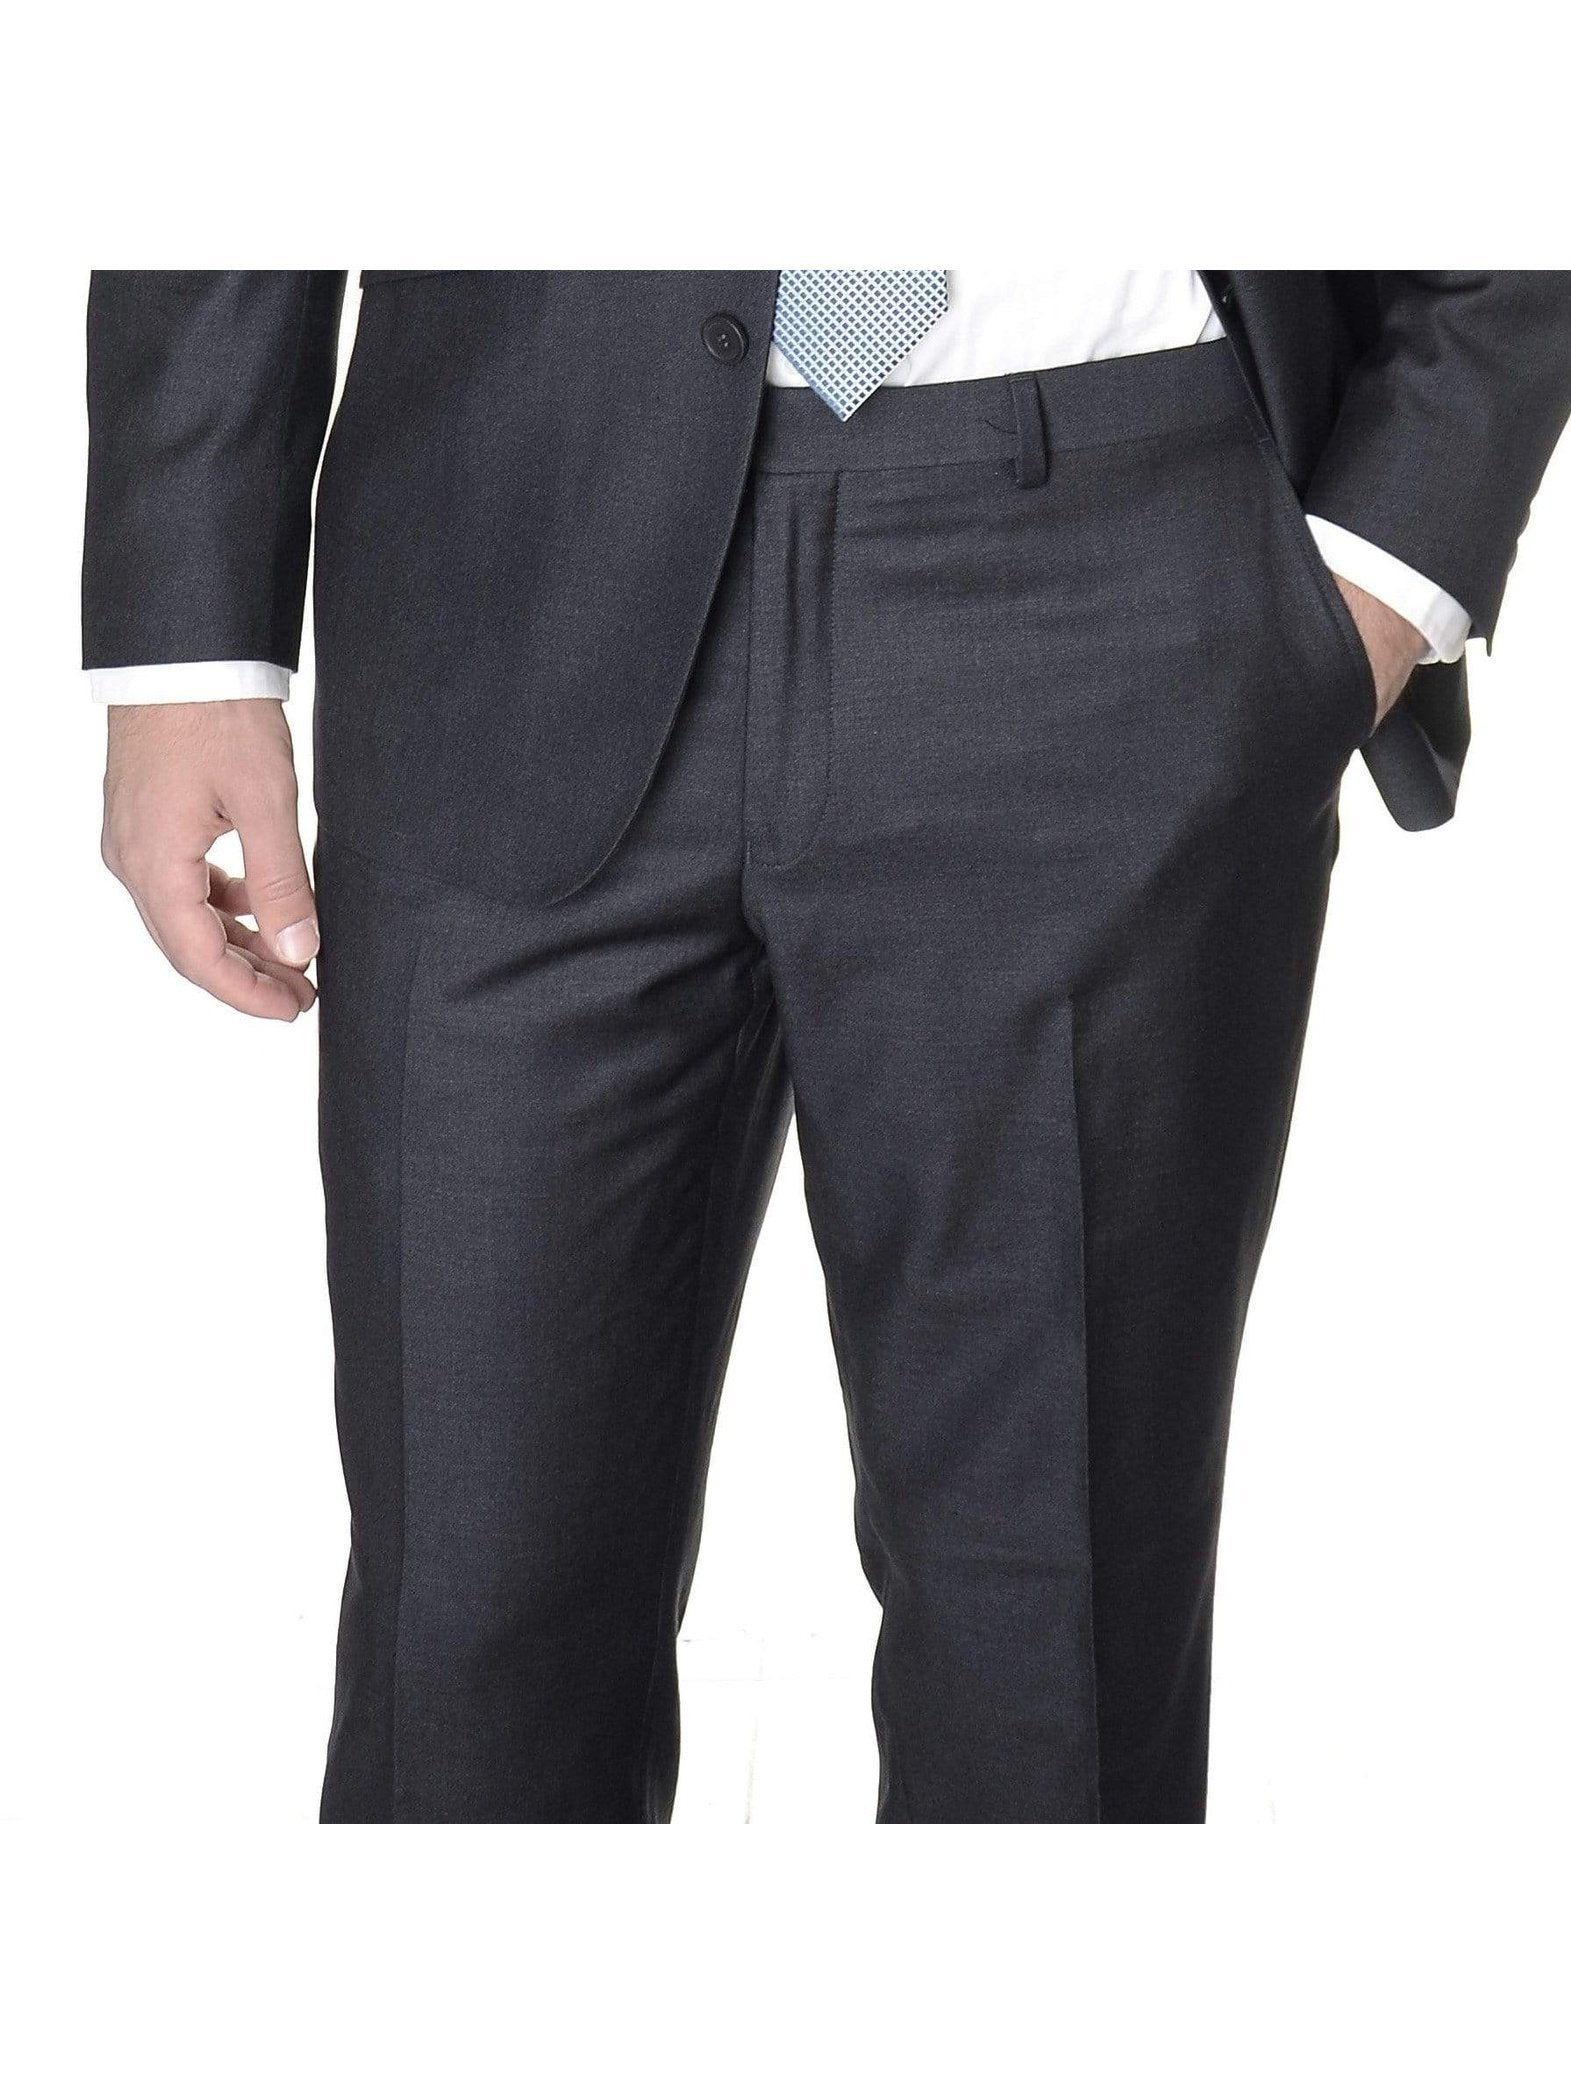 Bespoke High Quality Men's Dark Grey Dress Pants/Trousers - China Pants and  Mans' Pants price | Made-in-China.com